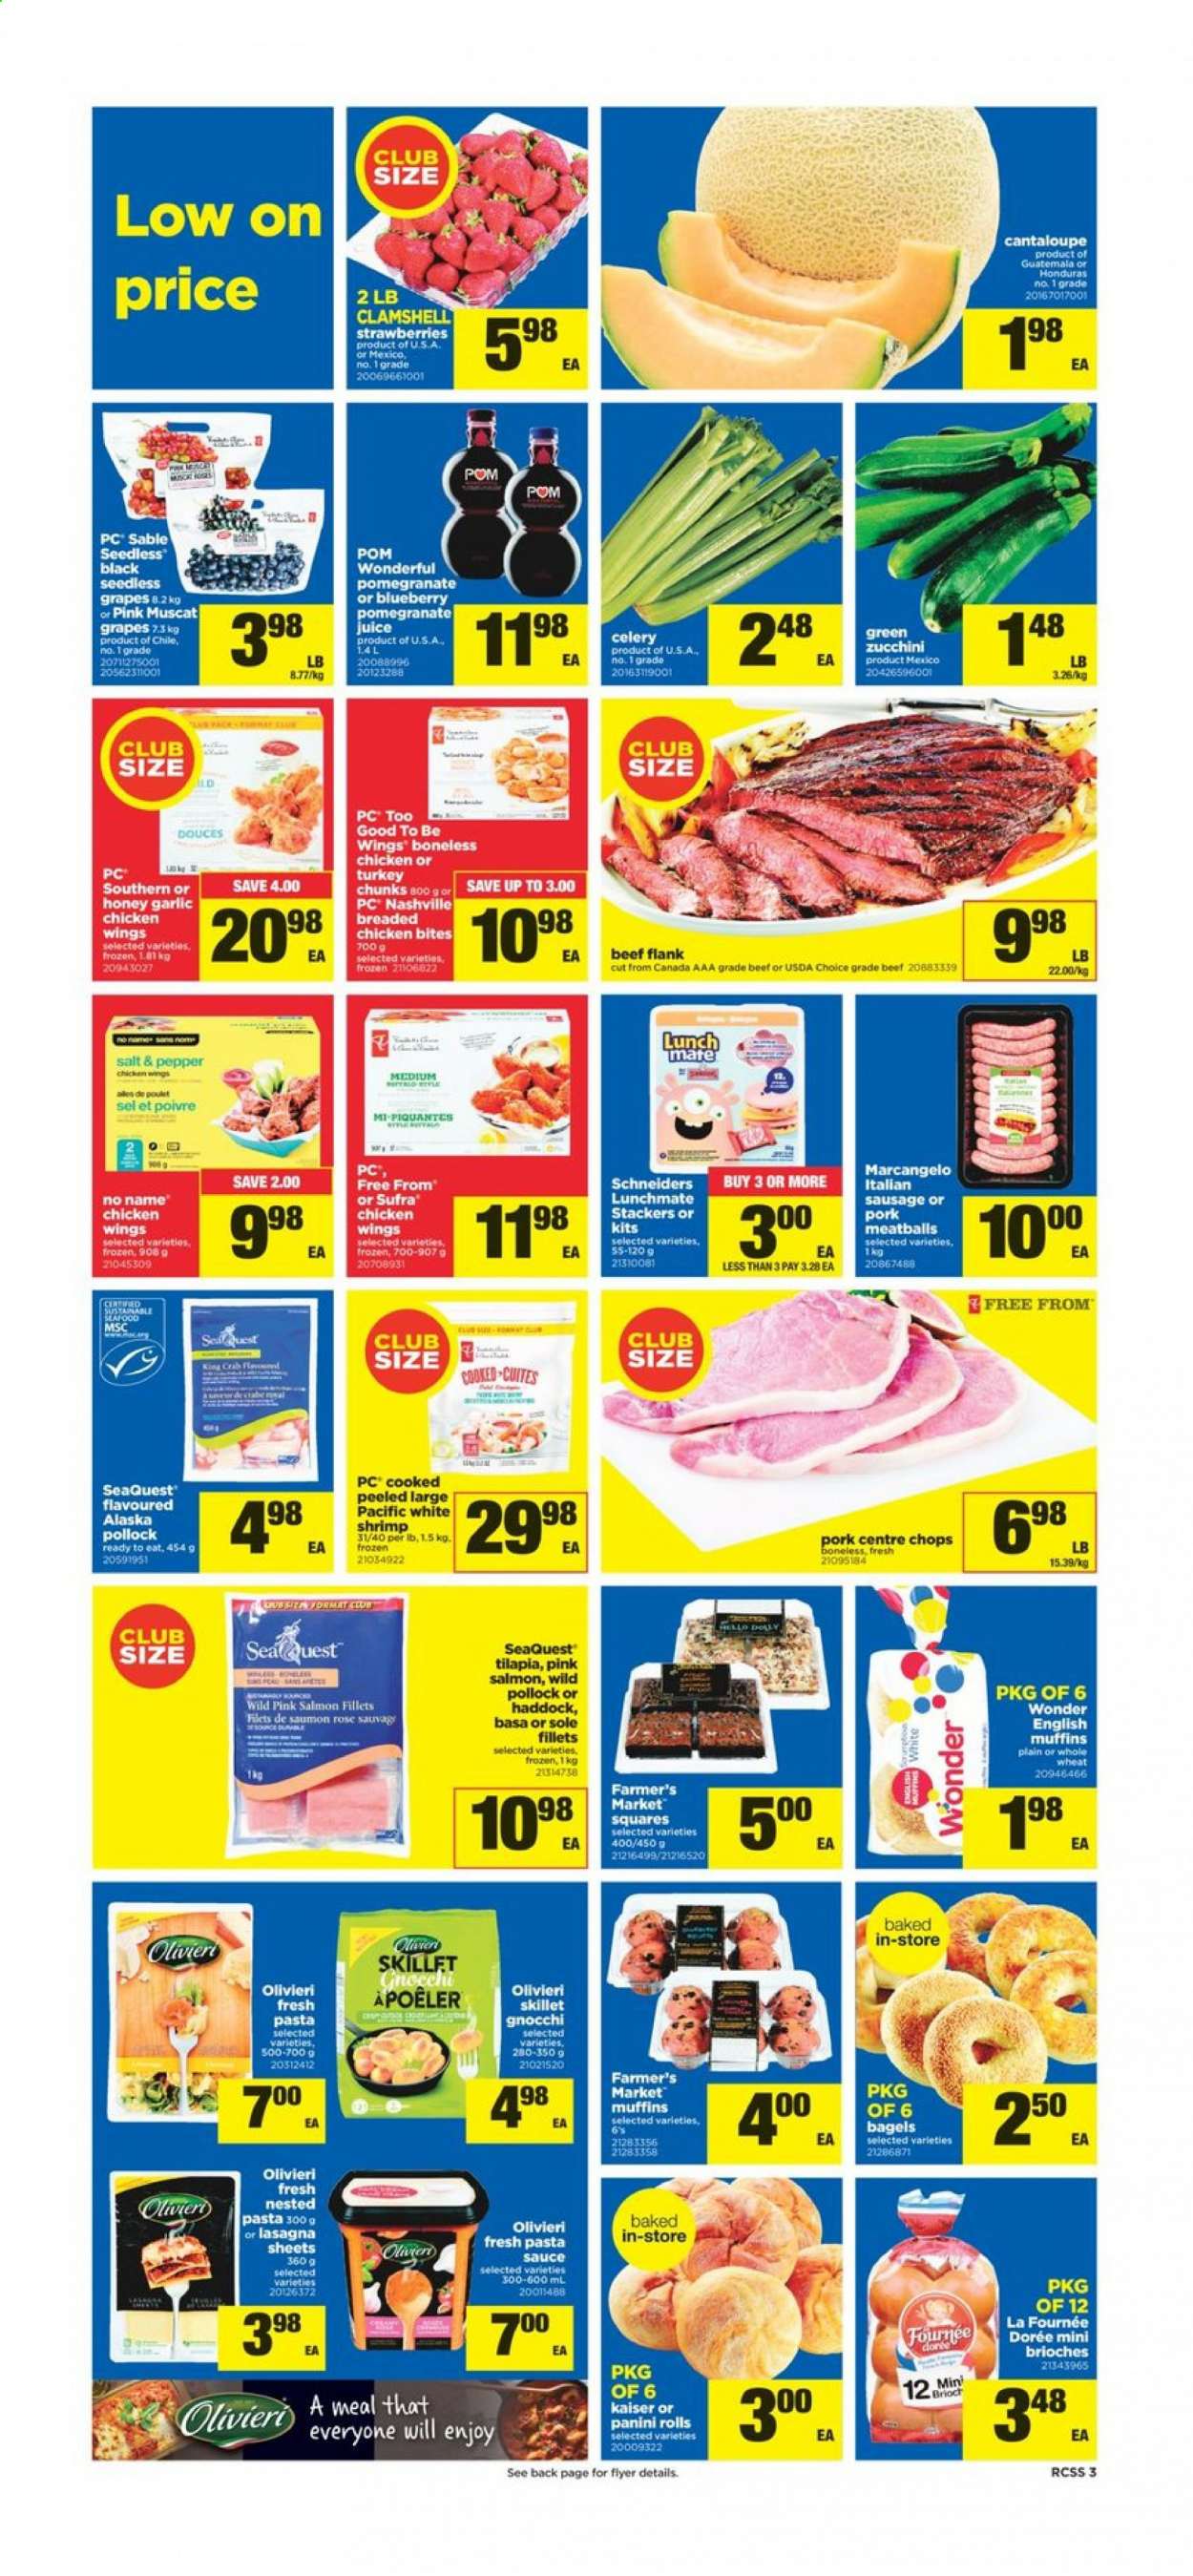 thumbnail - Real Canadian Superstore Flyer - April 15, 2021 - April 21, 2021 - Sales products - bagels, english muffins, panini, cantaloupe, celery, garlic, zucchini, grapes, strawberries, salmon, salmon fillet, tilapia, haddock, king crab, pollock, crab, shrimps, No Name, meatballs, sauce, fried chicken, sausage, chicken wings, chicken bites, lasagne sheets, juice, rosé wine, rose, gnocchi. Page 4.